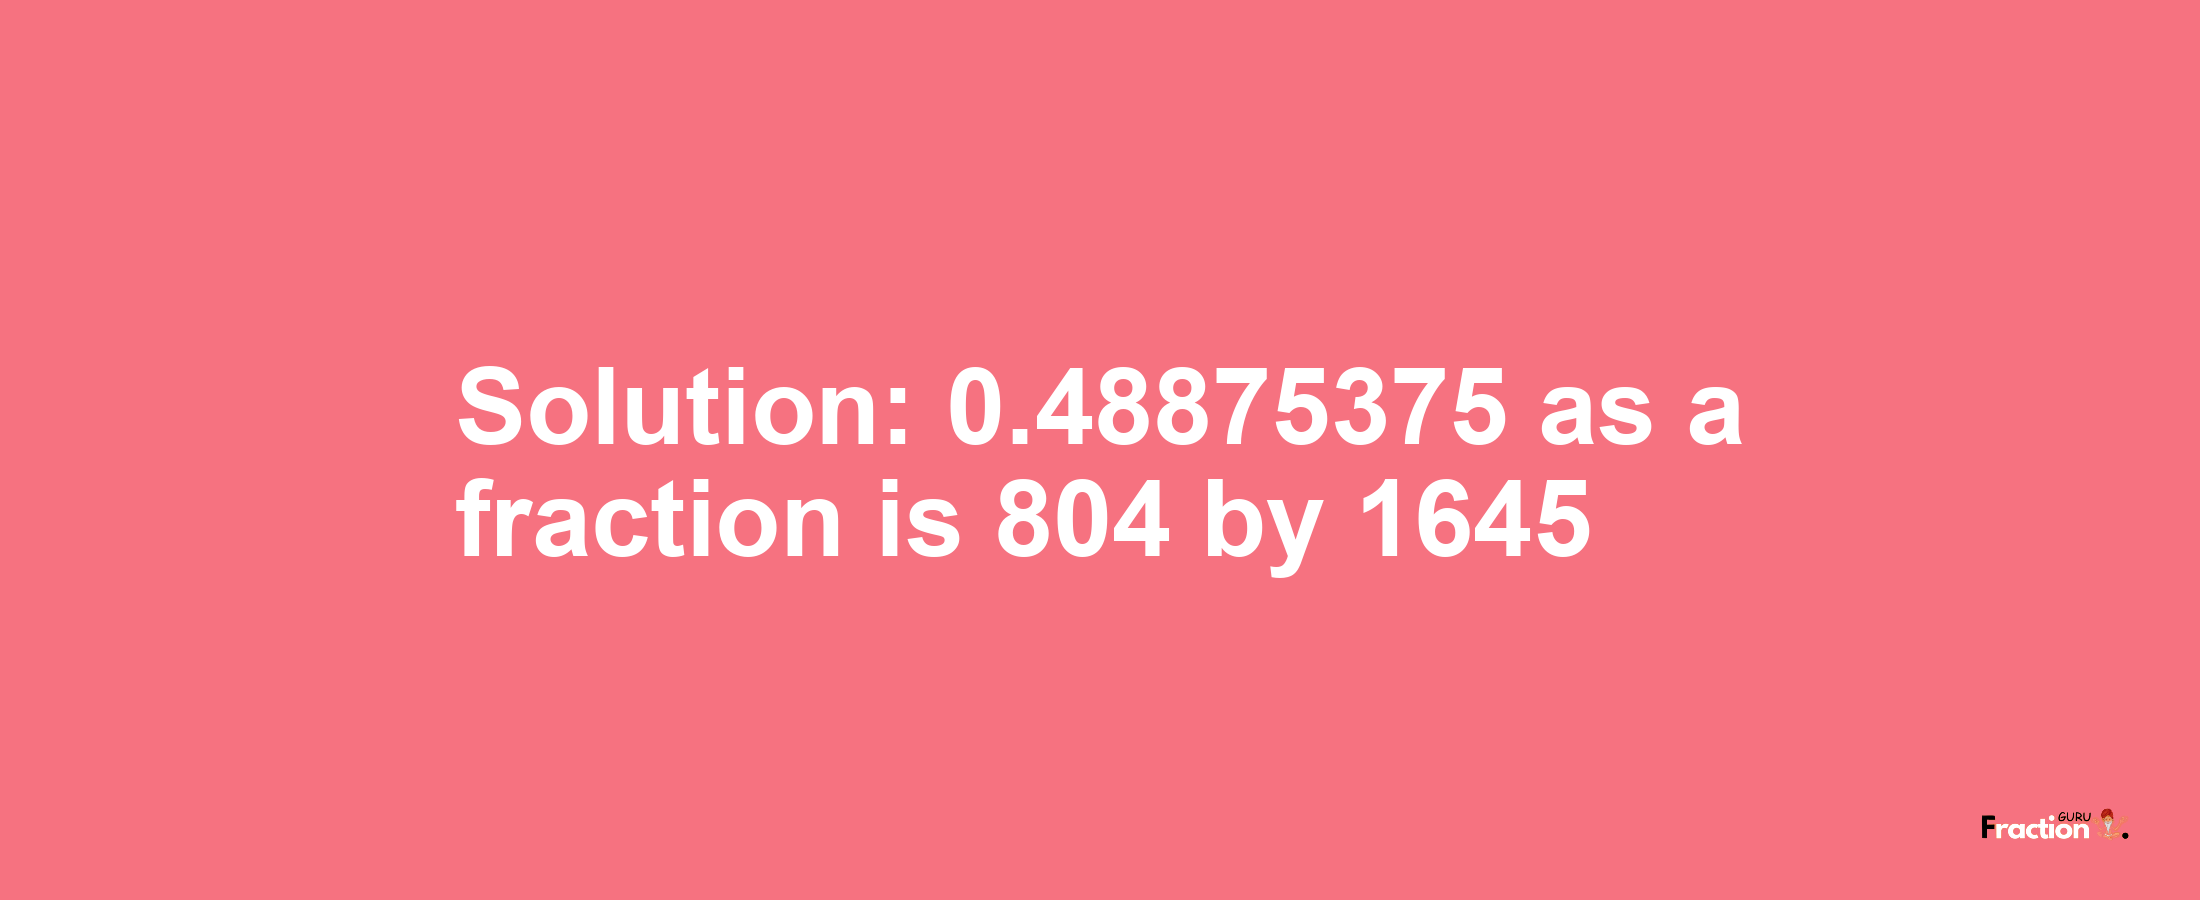 Solution:0.48875375 as a fraction is 804/1645